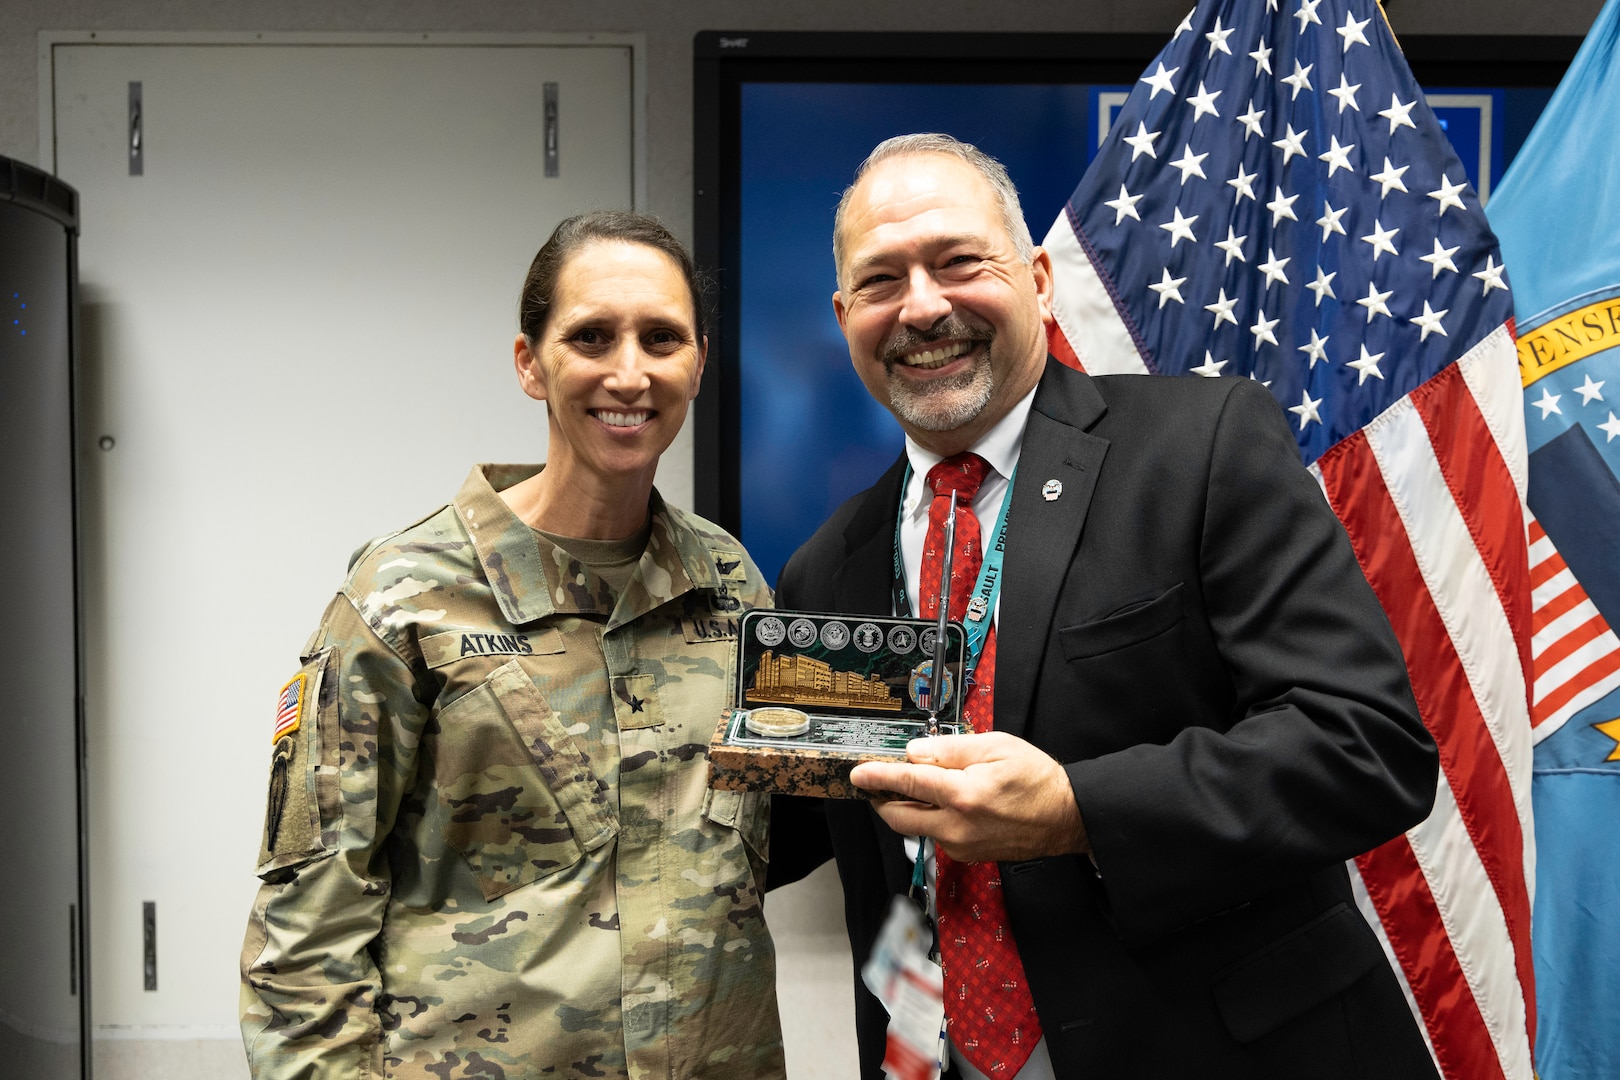 A light skinned woman with dark hair wearing a camouflage uniform smiles at the camera while giving a light skinned man, also smiling, with graying hair and beard wearing a dark suit and a red tie a stone desk set with engraving and a pen in a conference type room.